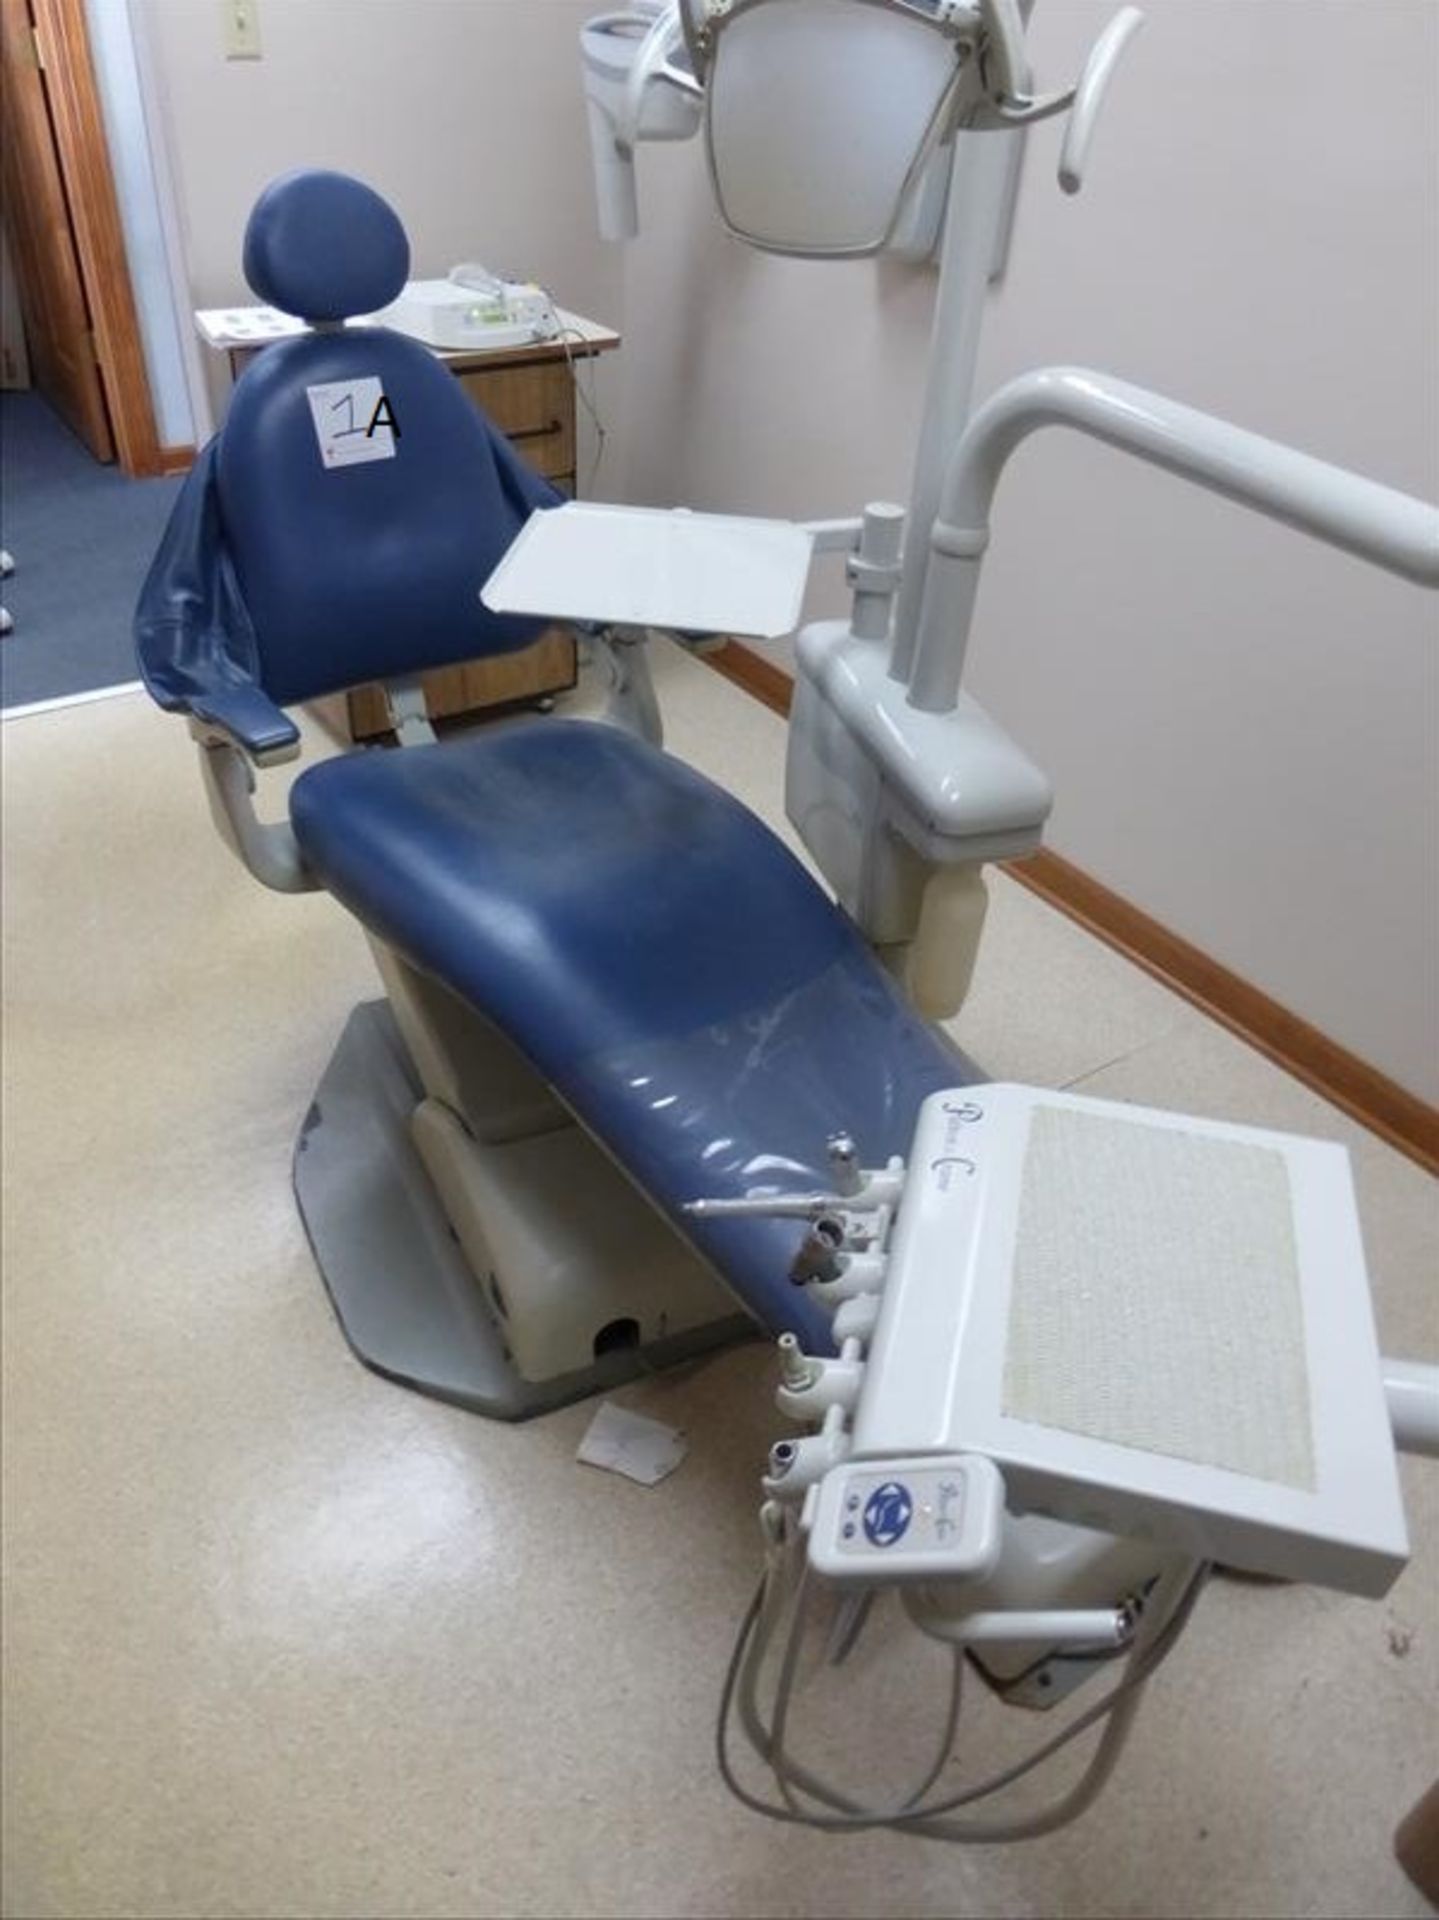 Pelton & Crane dental chair, model SP15 w/ delivery system, dental light and matching doctor and - Image 4 of 7